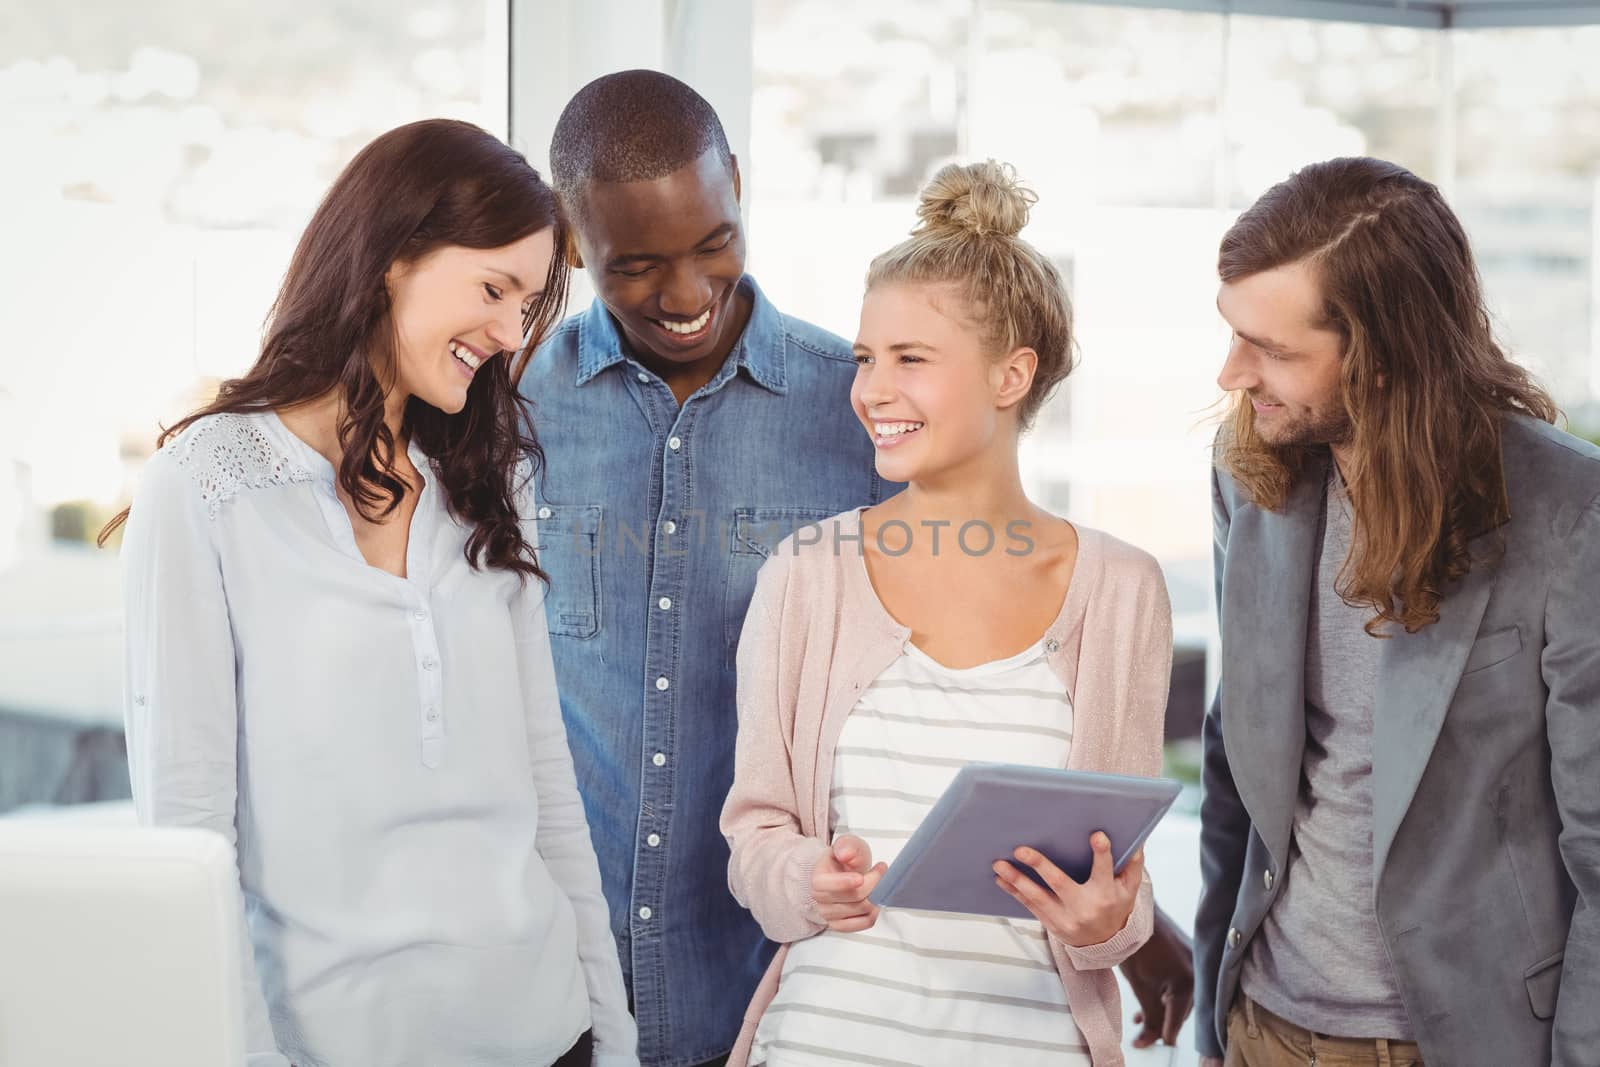 Smiling woman holding digital tablet and discussing with coworkers at office